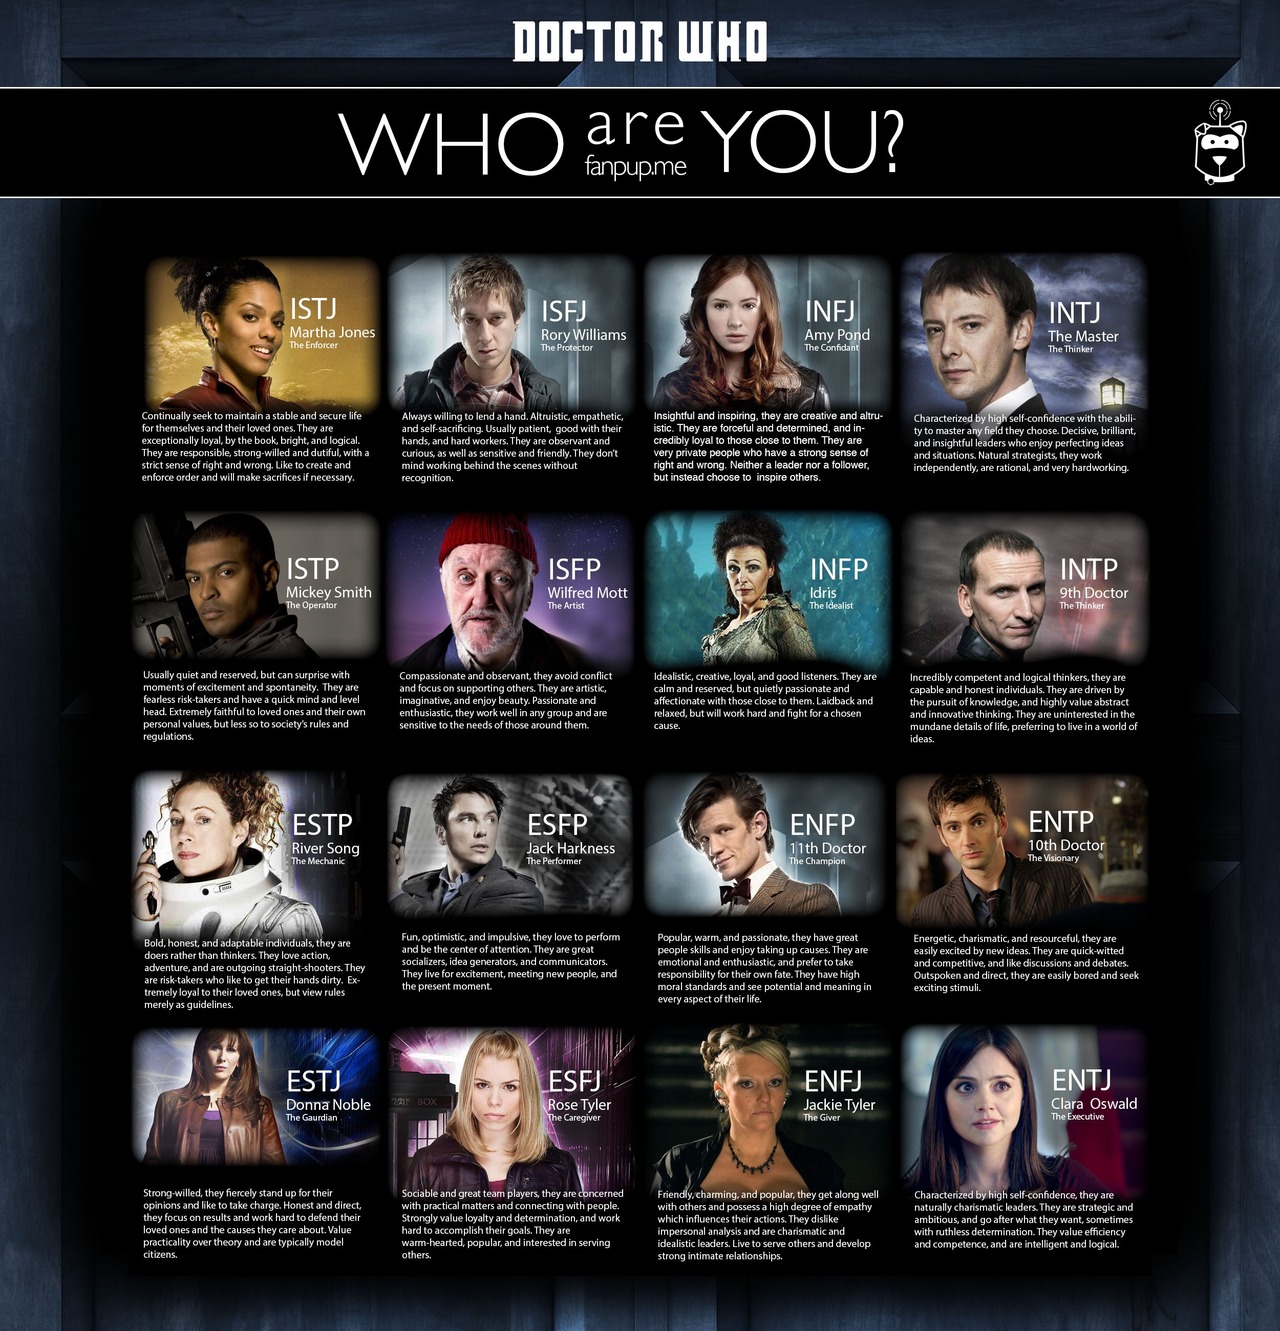 The Queen's Gambit: The MBTI® of the Main Characters